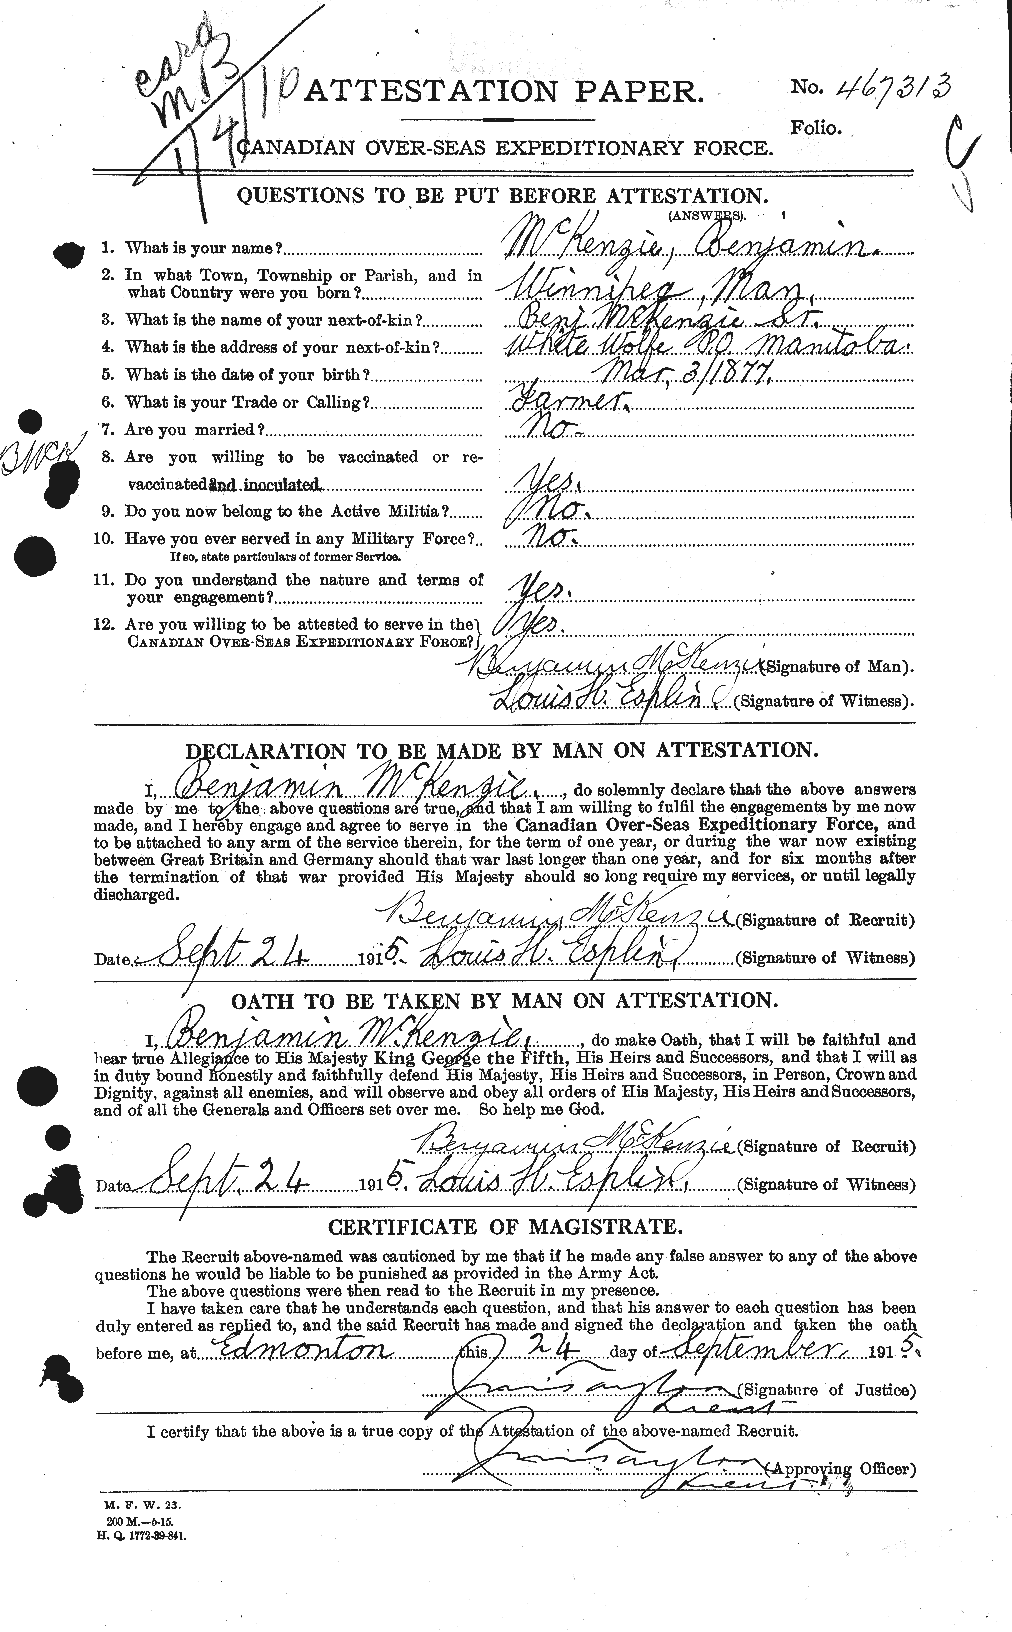 Personnel Records of the First World War - CEF 528895a